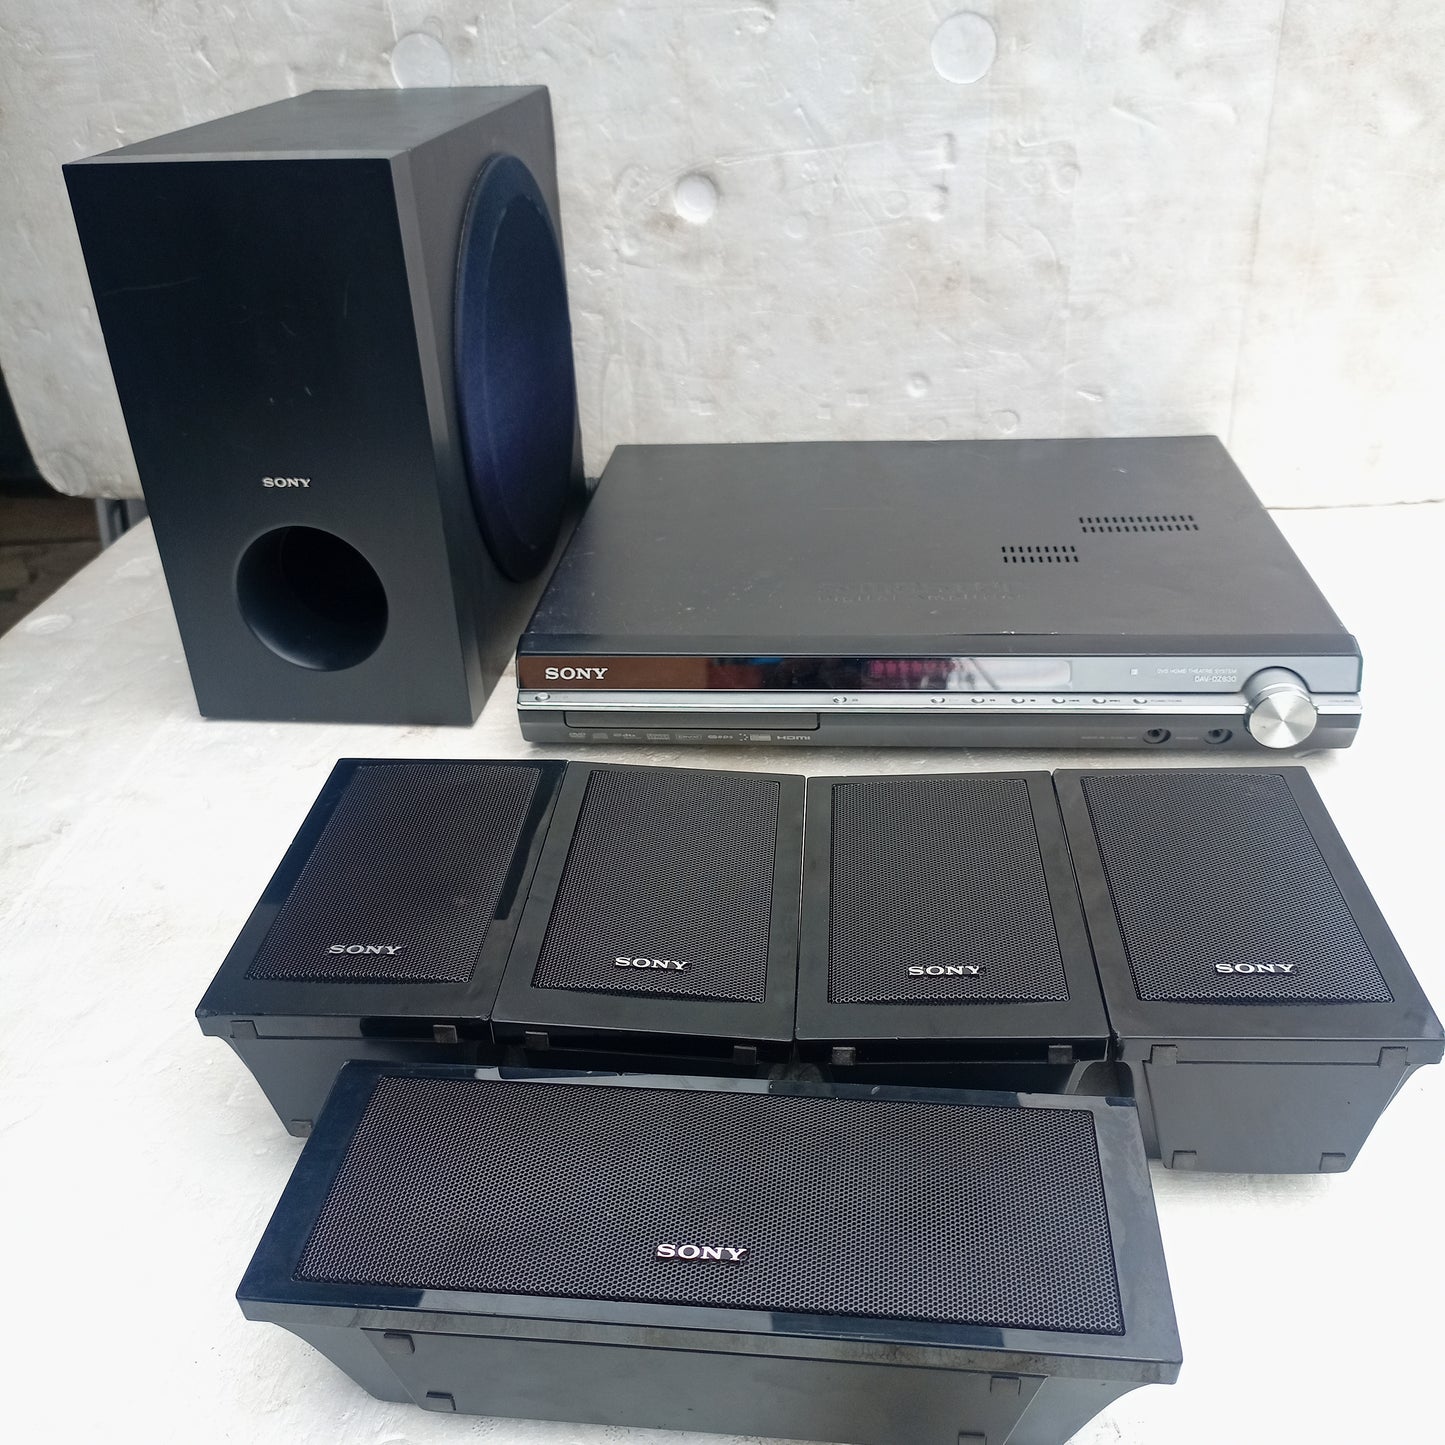 Sony 5.1Ch 1000 Watts DVD Home Theater System - Foreign Used